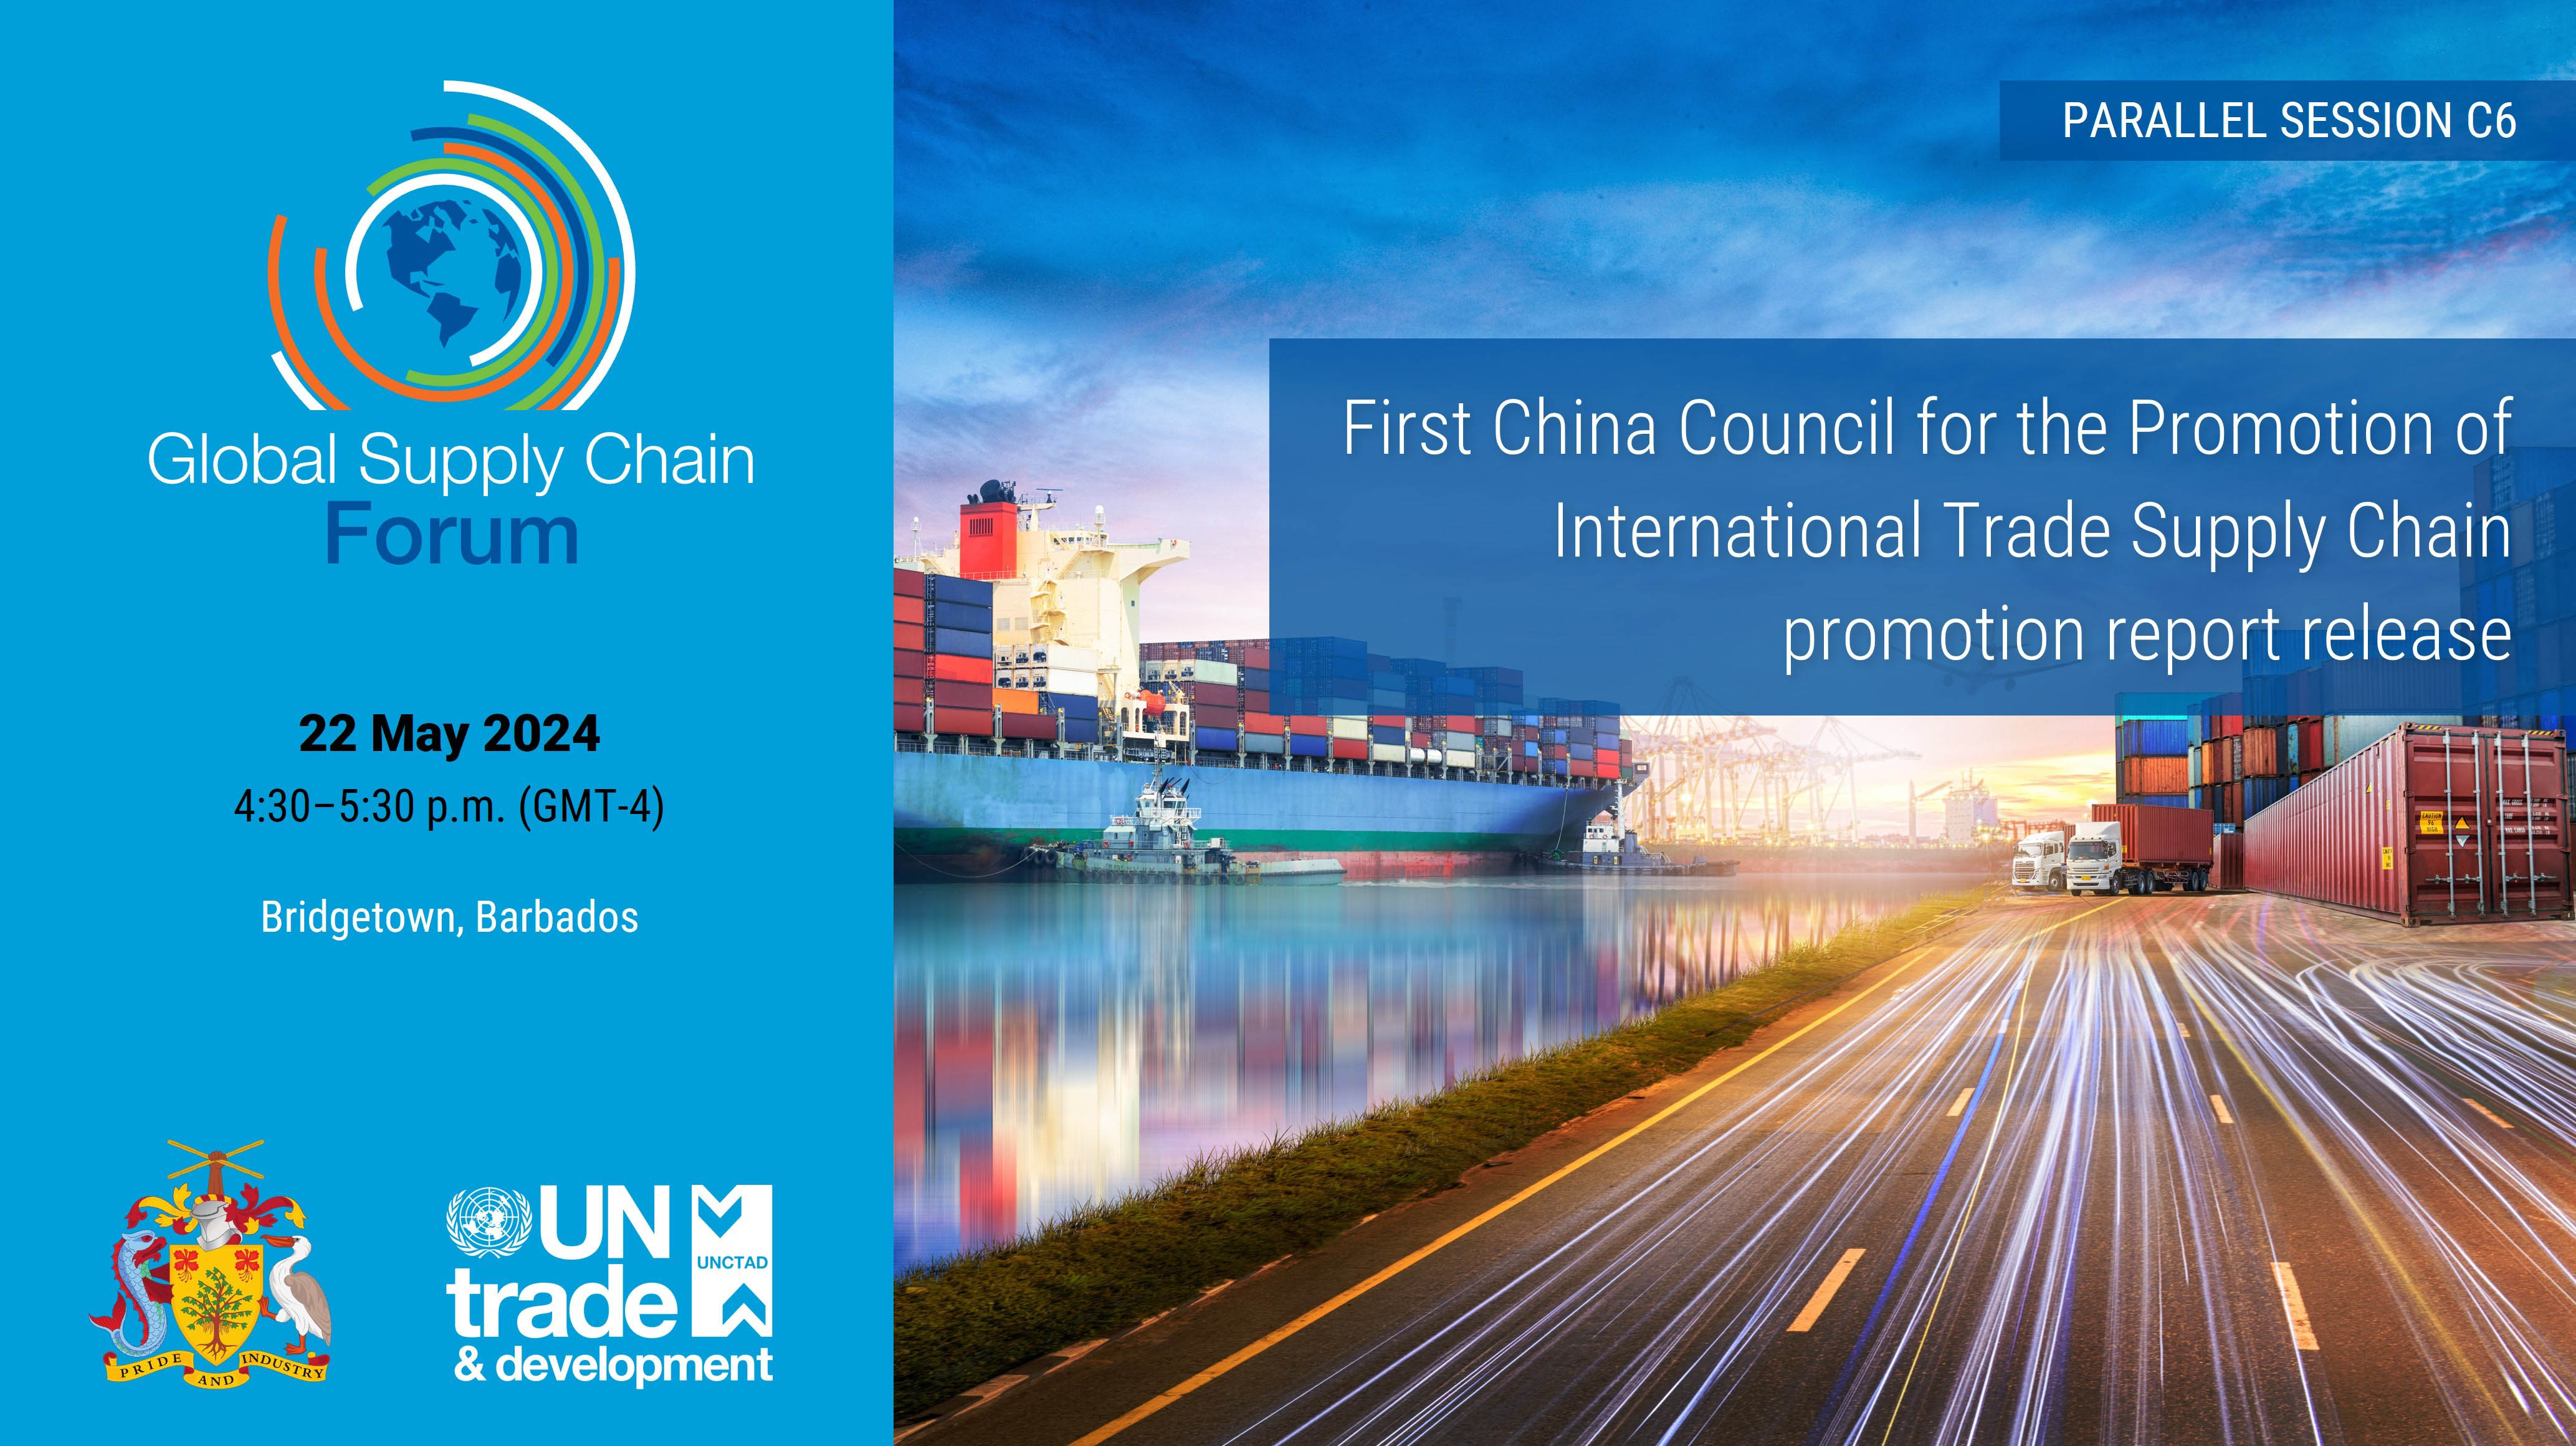 First China Council for the Promotion of International Trade Supply Chain promotion report release